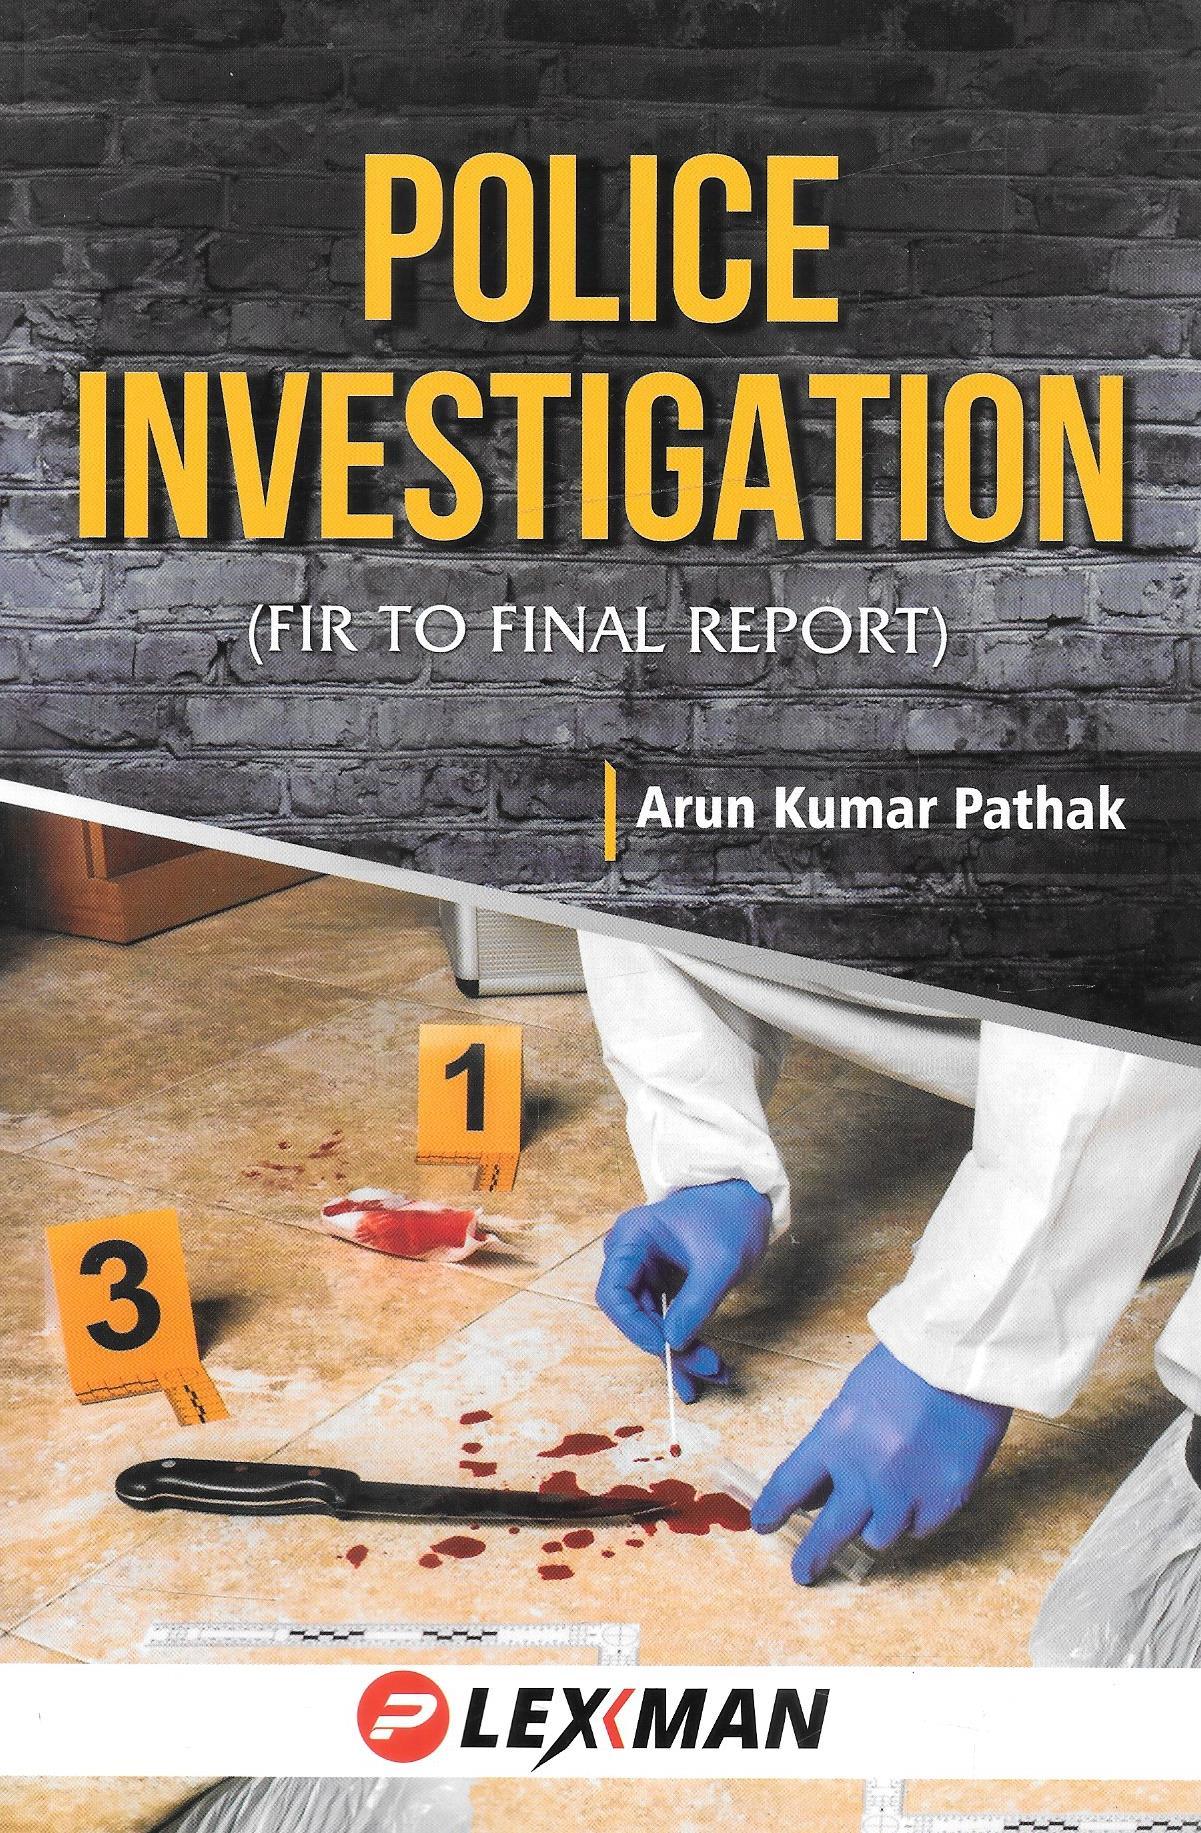 Police Investigation (Fir To Final Report)